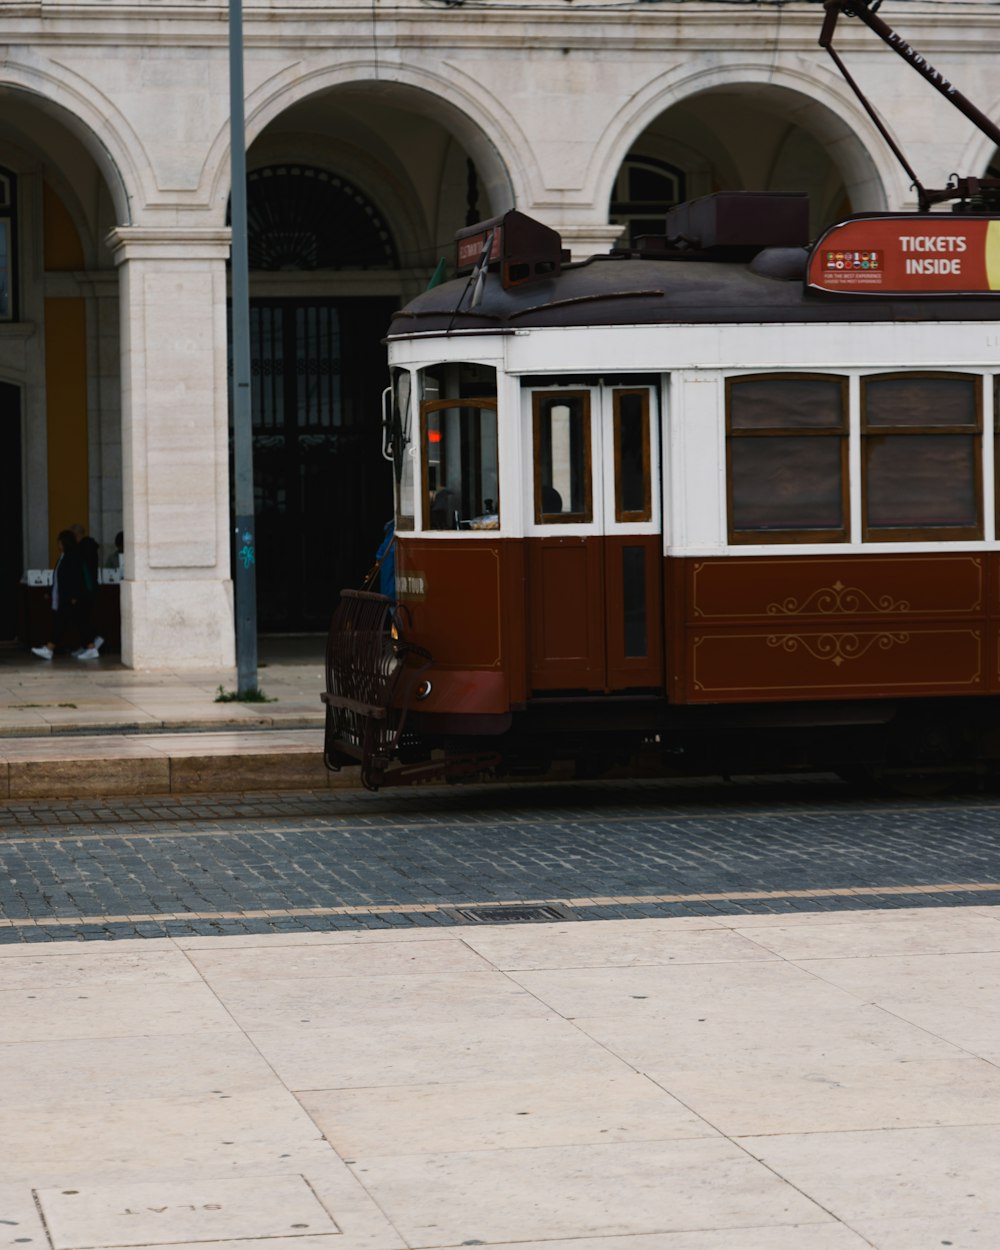 a trolley car on a street in front of a building